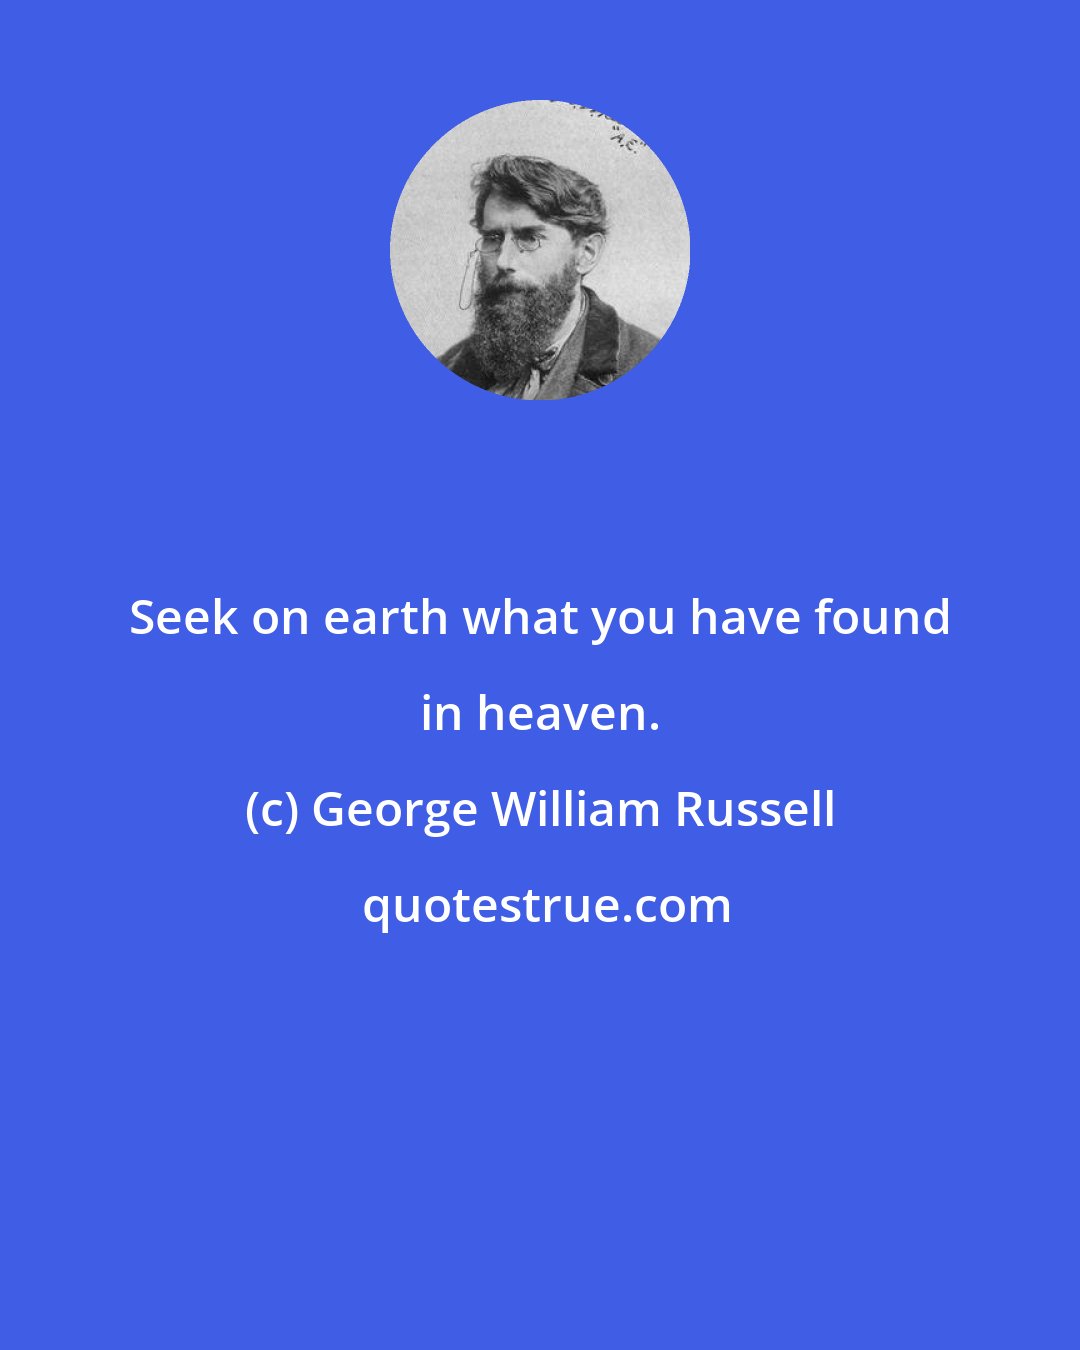 George William Russell: Seek on earth what you have found in heaven.